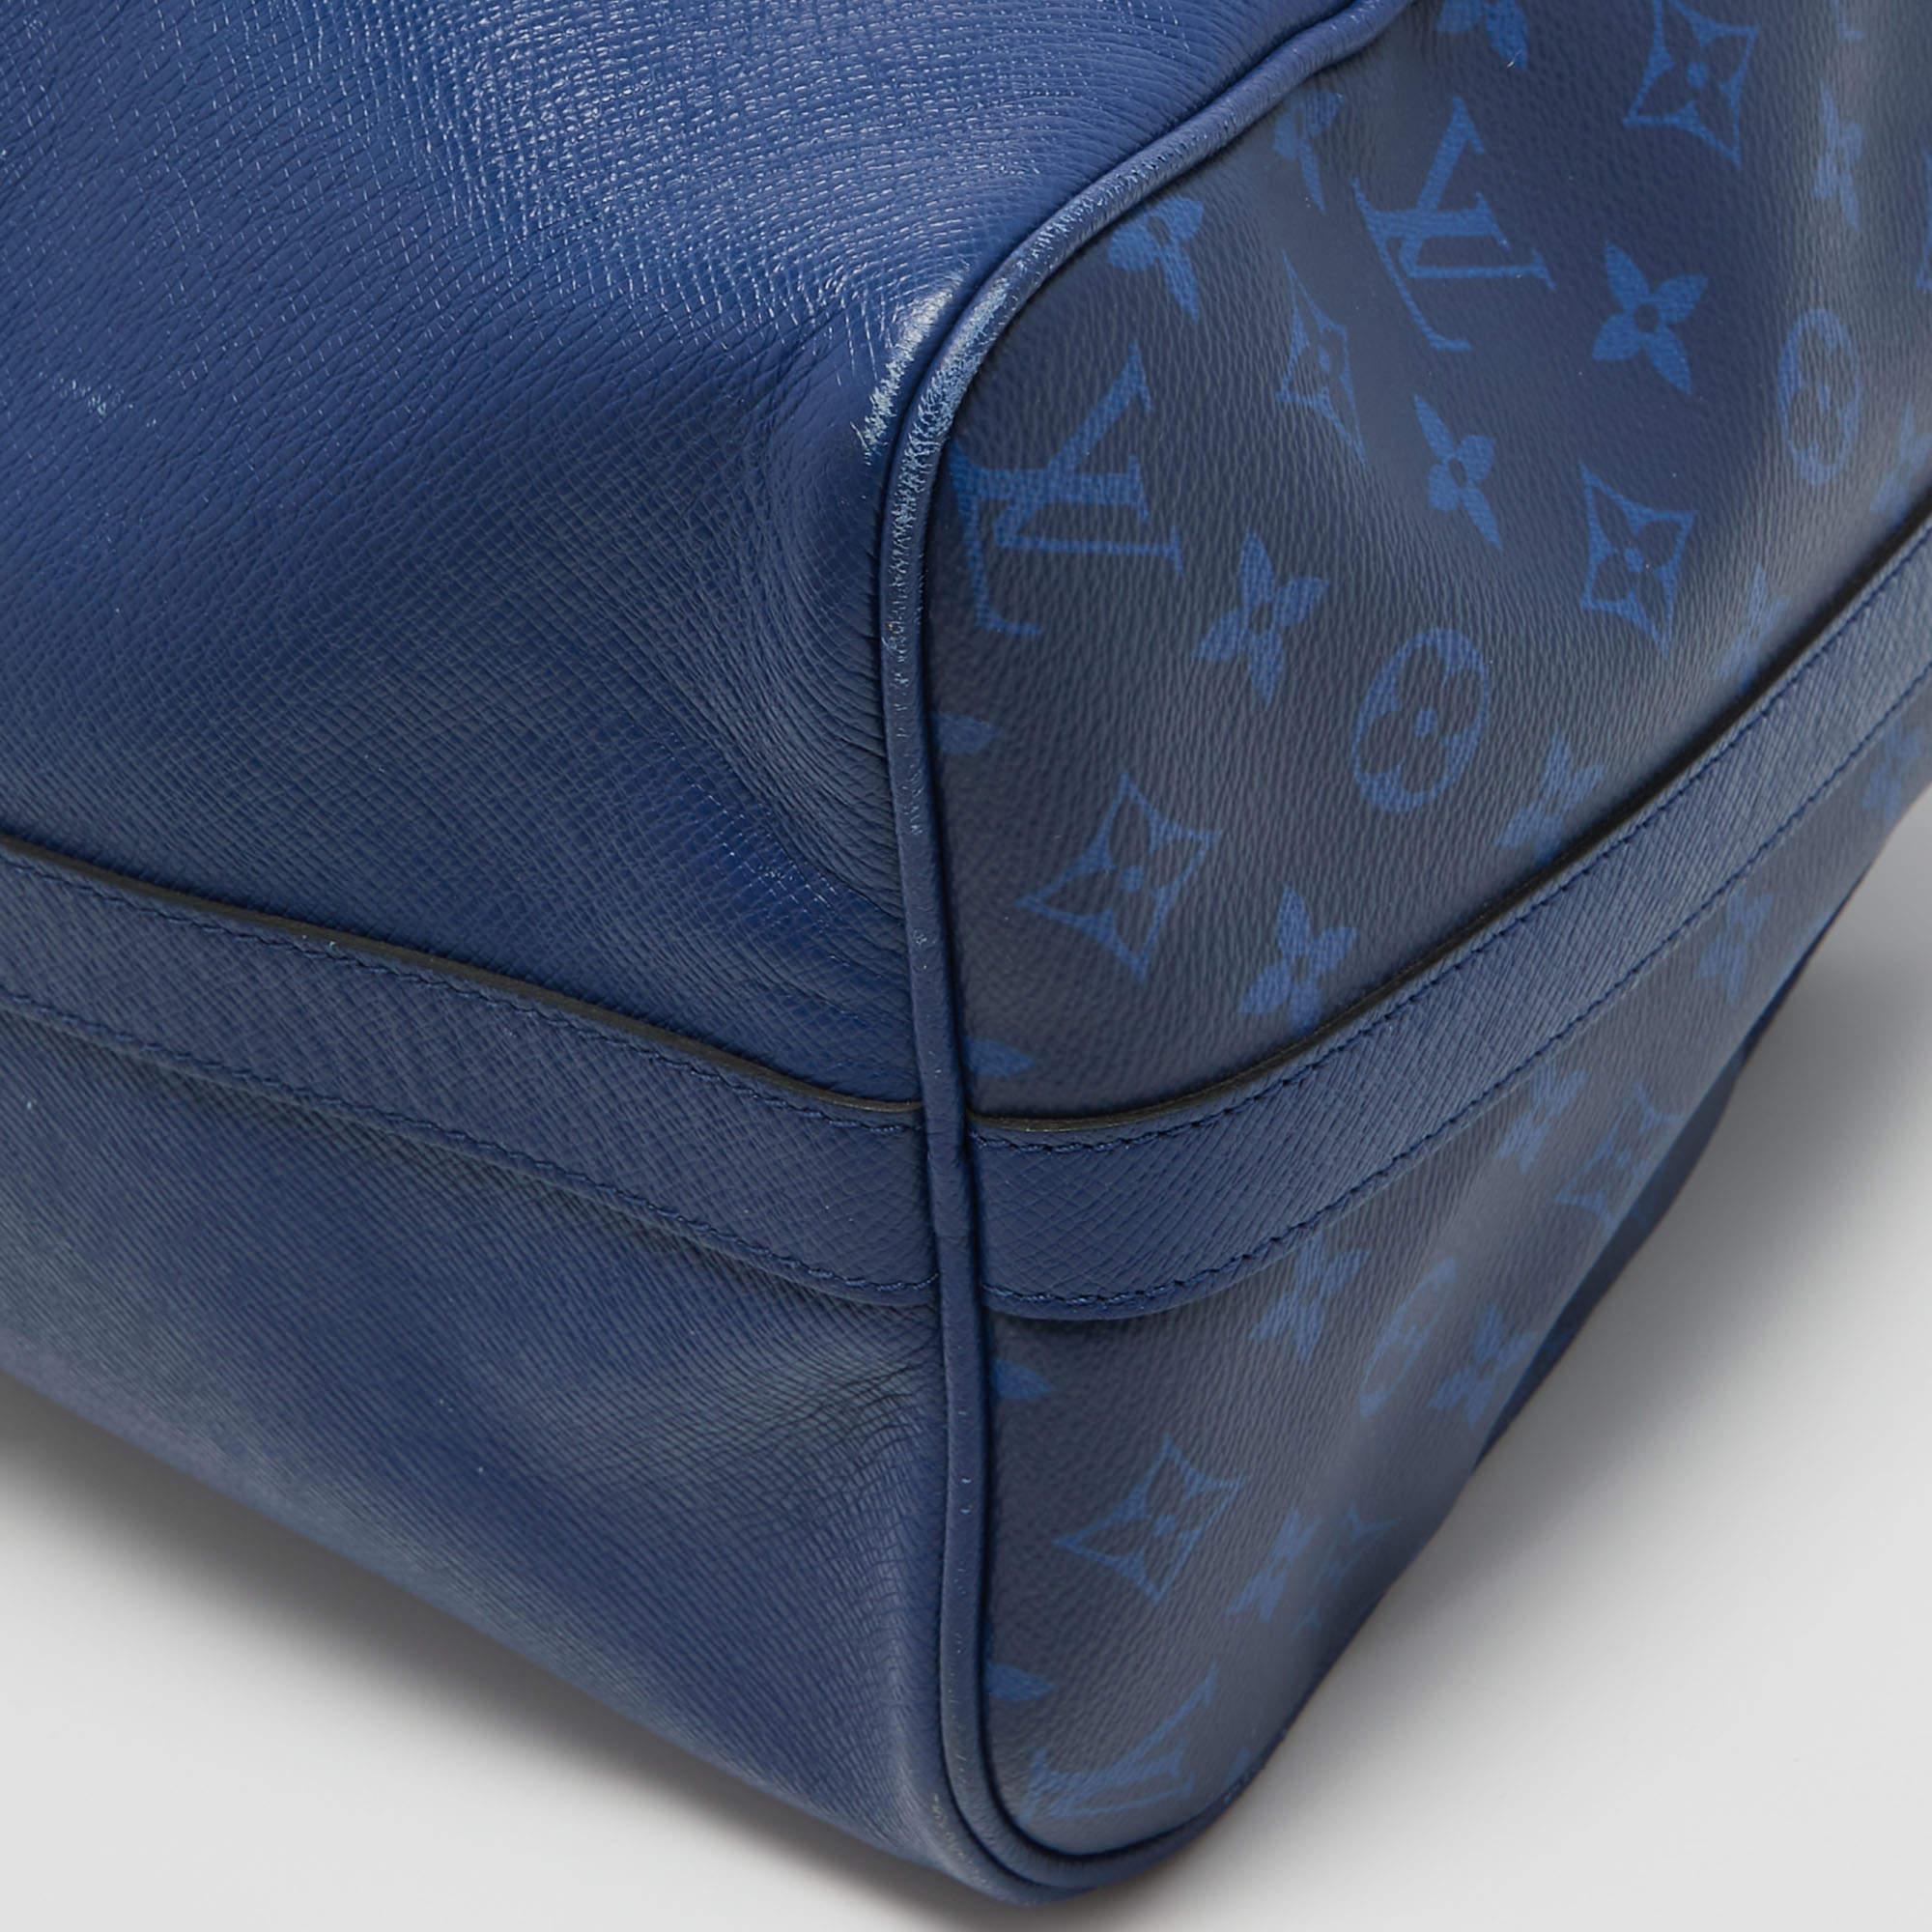 Men's Louis Vuitton Pacific Blue Taiga Leather and Monogram Eclipse Canvas Keepall Ban